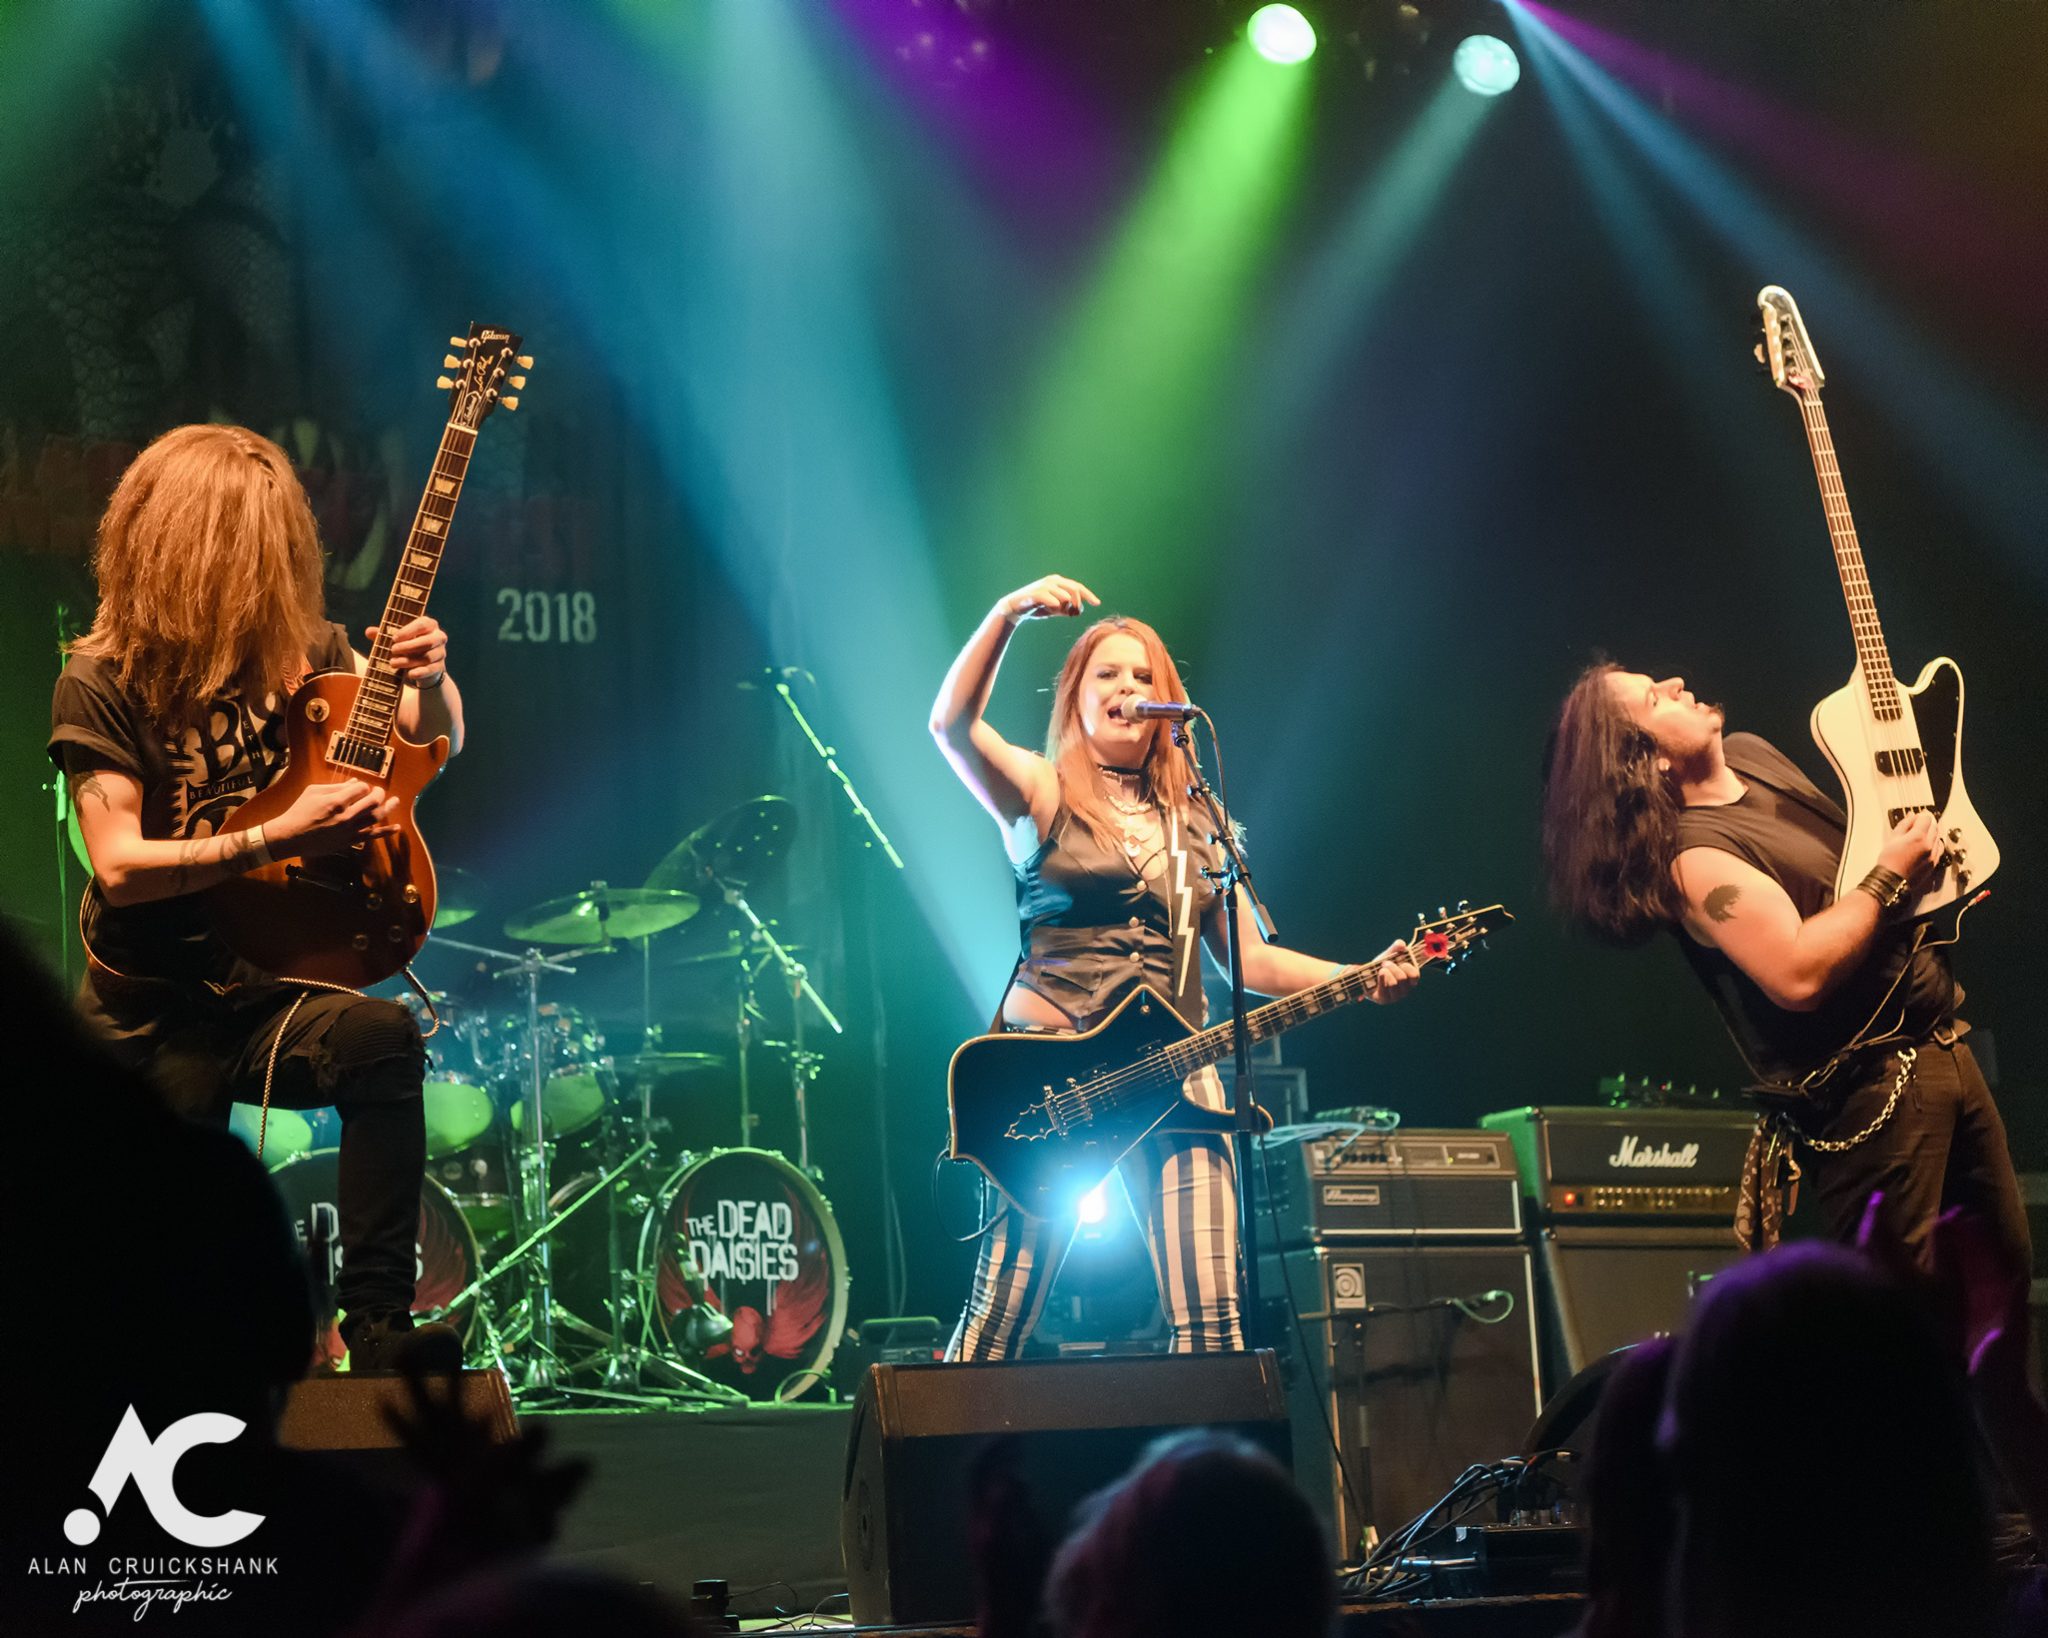 Beth Blade and the Beautiful Disasters at Monstersfest 2018 Ironworks Inverness November 2018 3 - Monstersfest 2018 - IMAGES